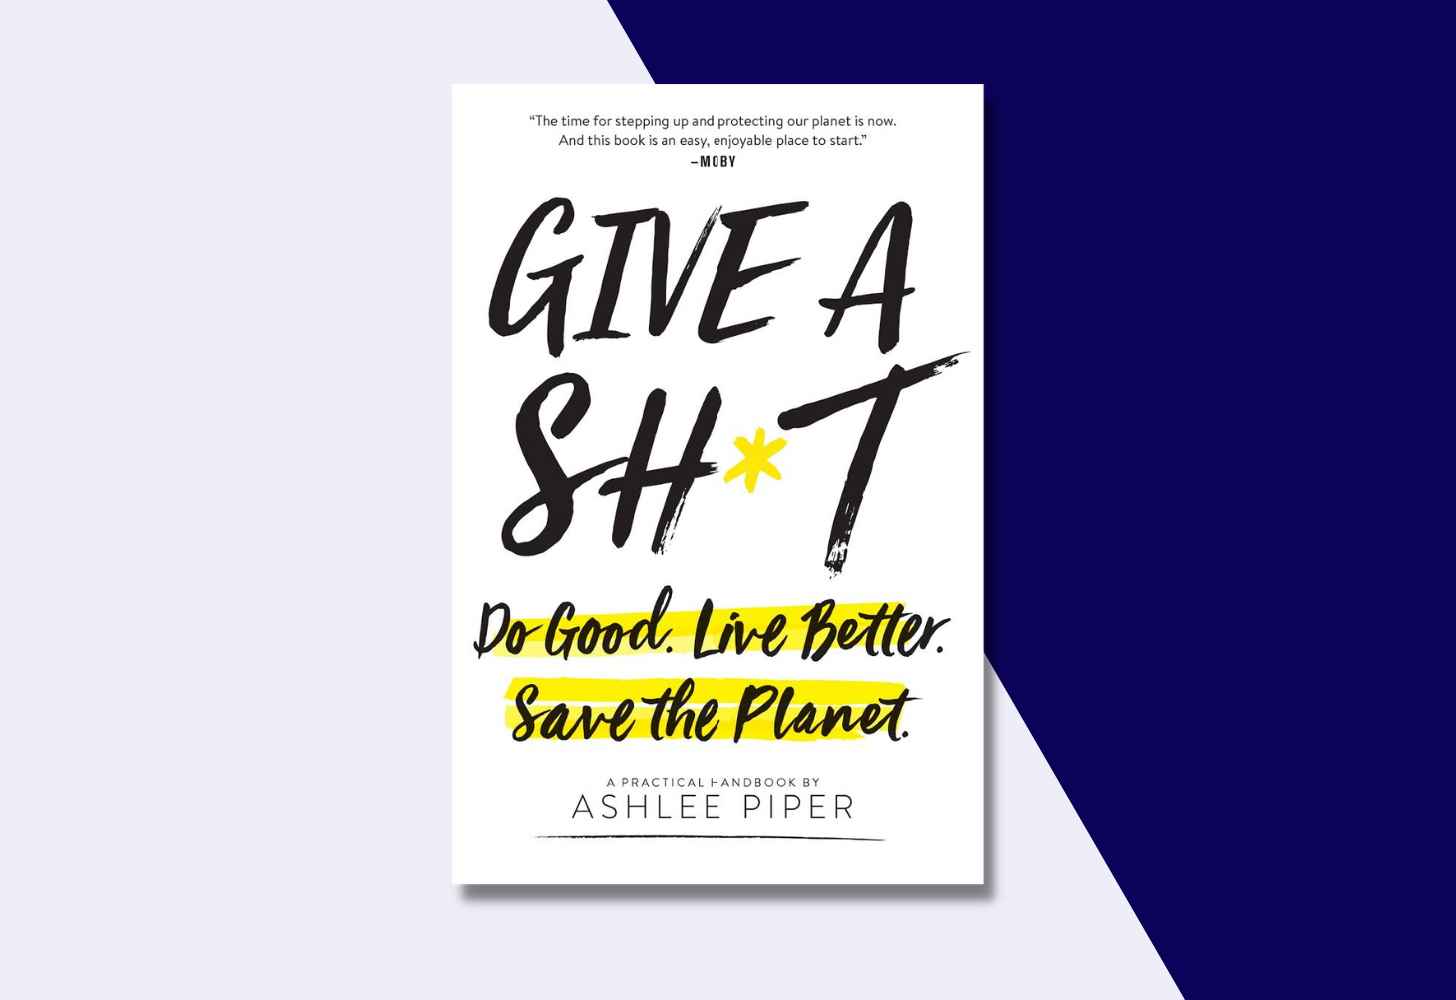 The Cover Of “Give a Sh*t: Do Good. Live Better. Save the Planet.” by Ashlee Piper